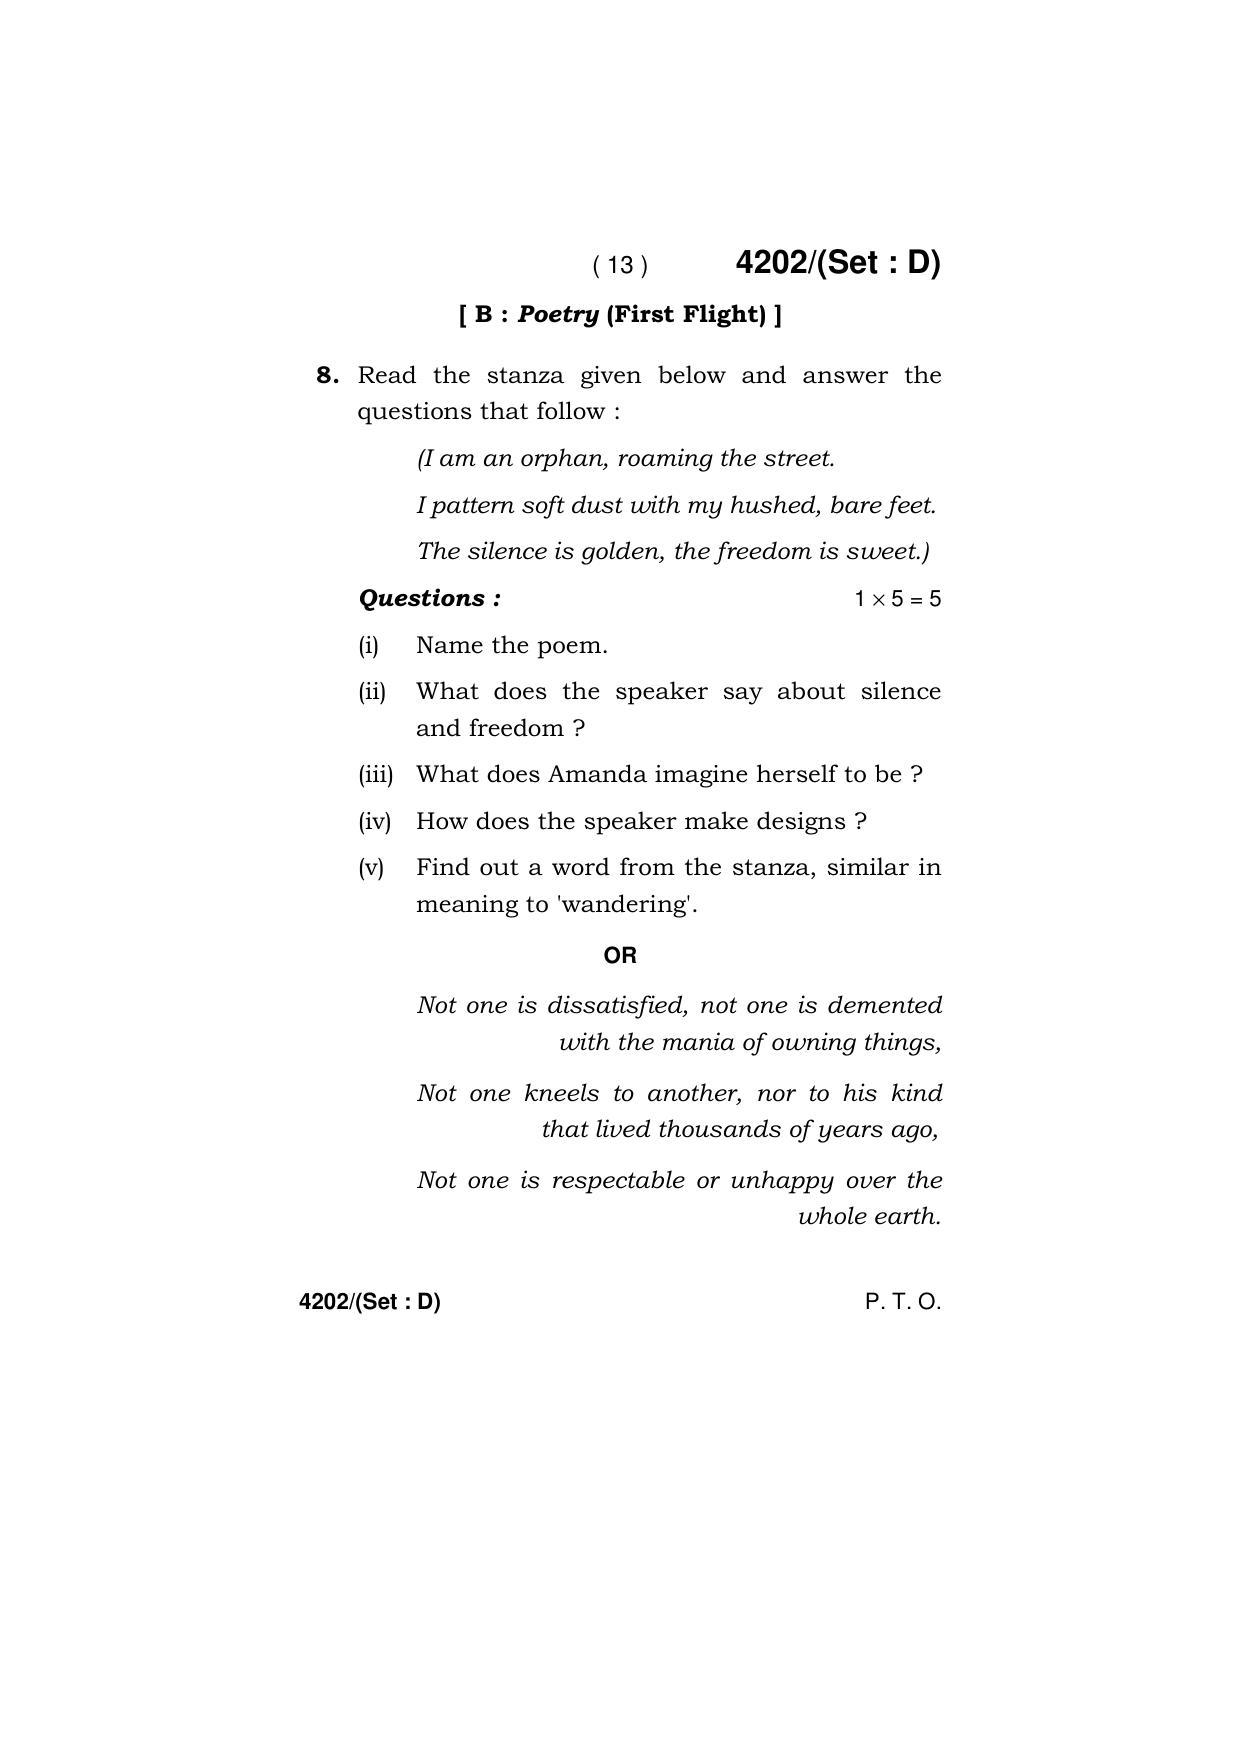 Haryana Board HBSE Class 10 English (All Set) 2019 Question Paper - Page 61